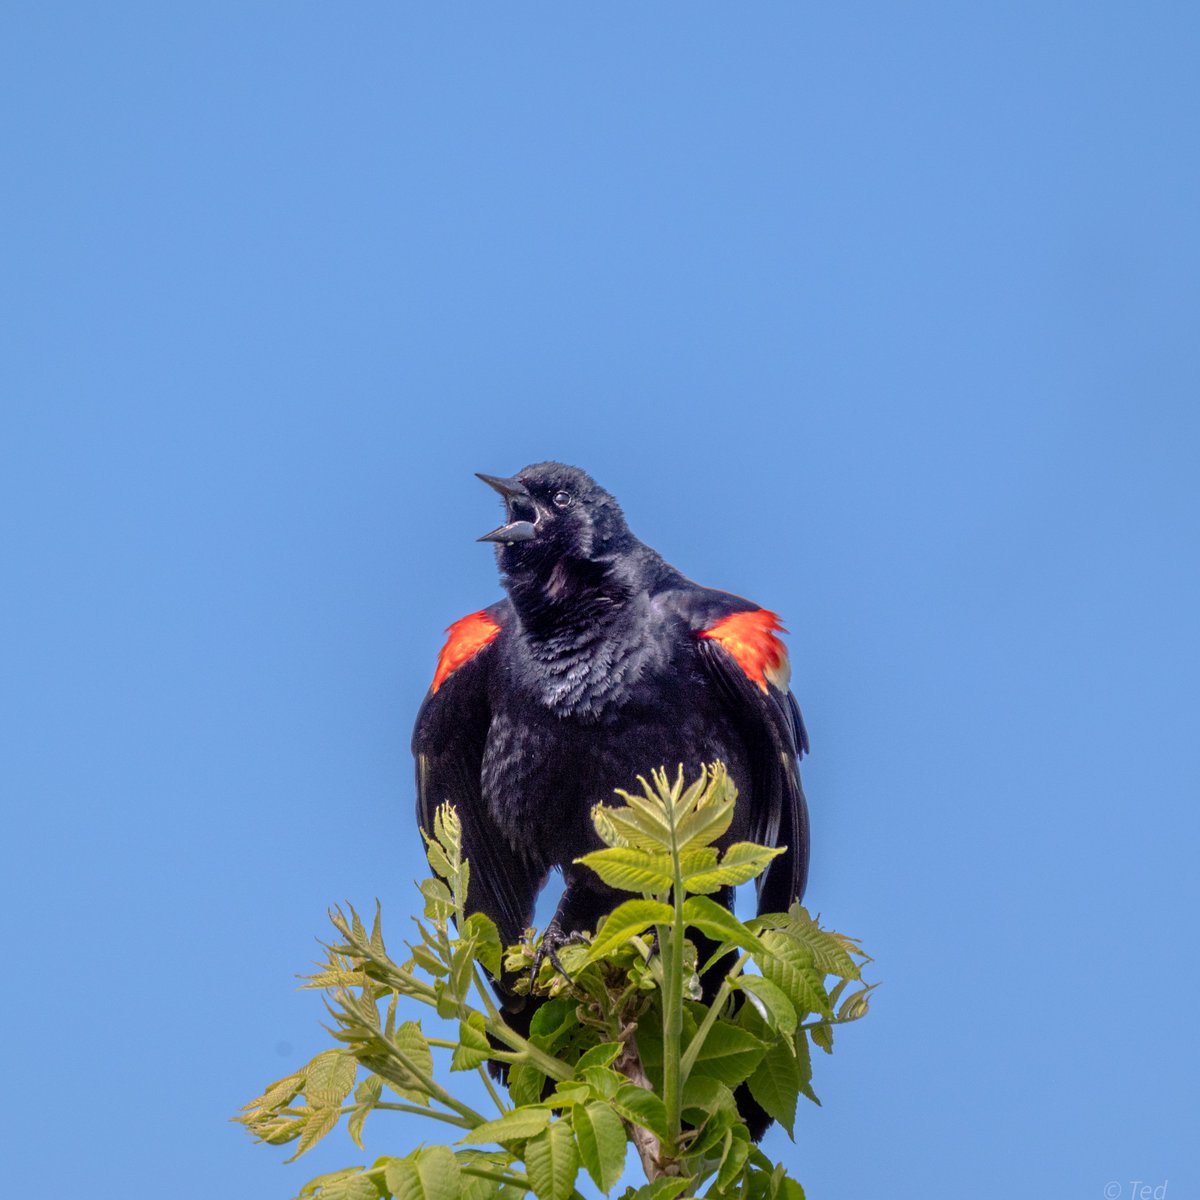 Finally a Friday! Hope you can get out to hear all the Birds chirping around you, it's a beautiful realization that life is Incredibly good. Let this sound be the gentle break in your routine. Have a wonderful weekend ahead my friends.✌️
#Redwingedblackbird #Nature #Photography